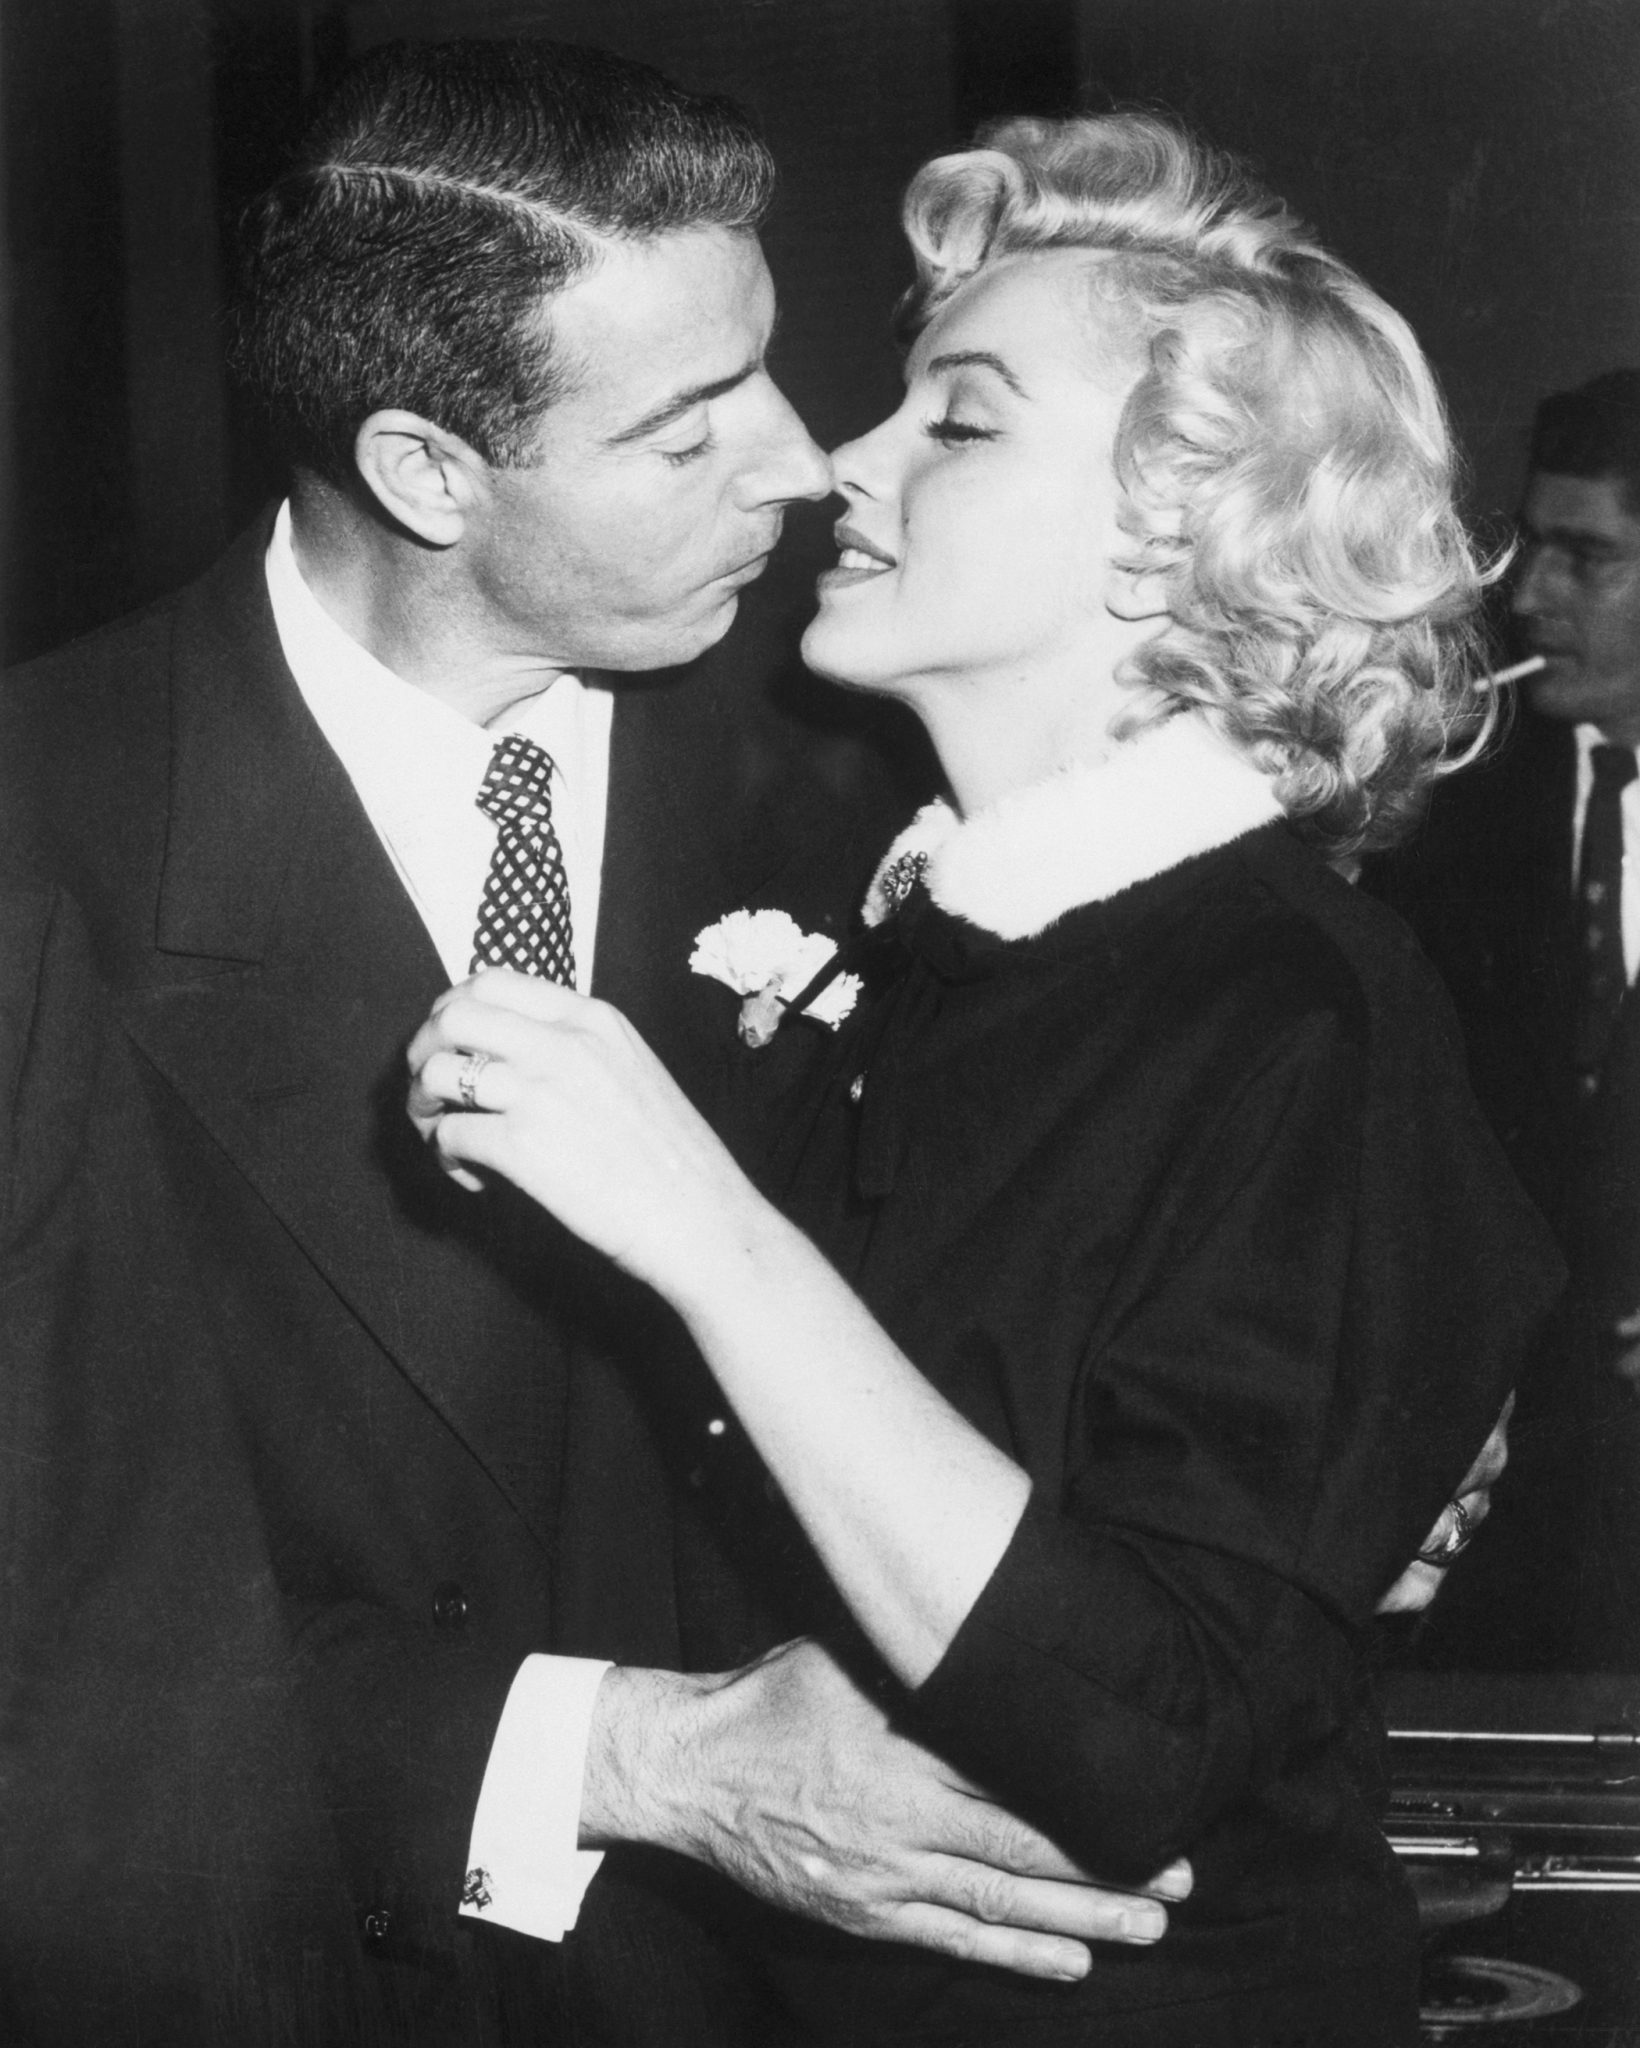 The Puzzling Story Of Marilyn Monroe's Missing Wedding Ring | The ...